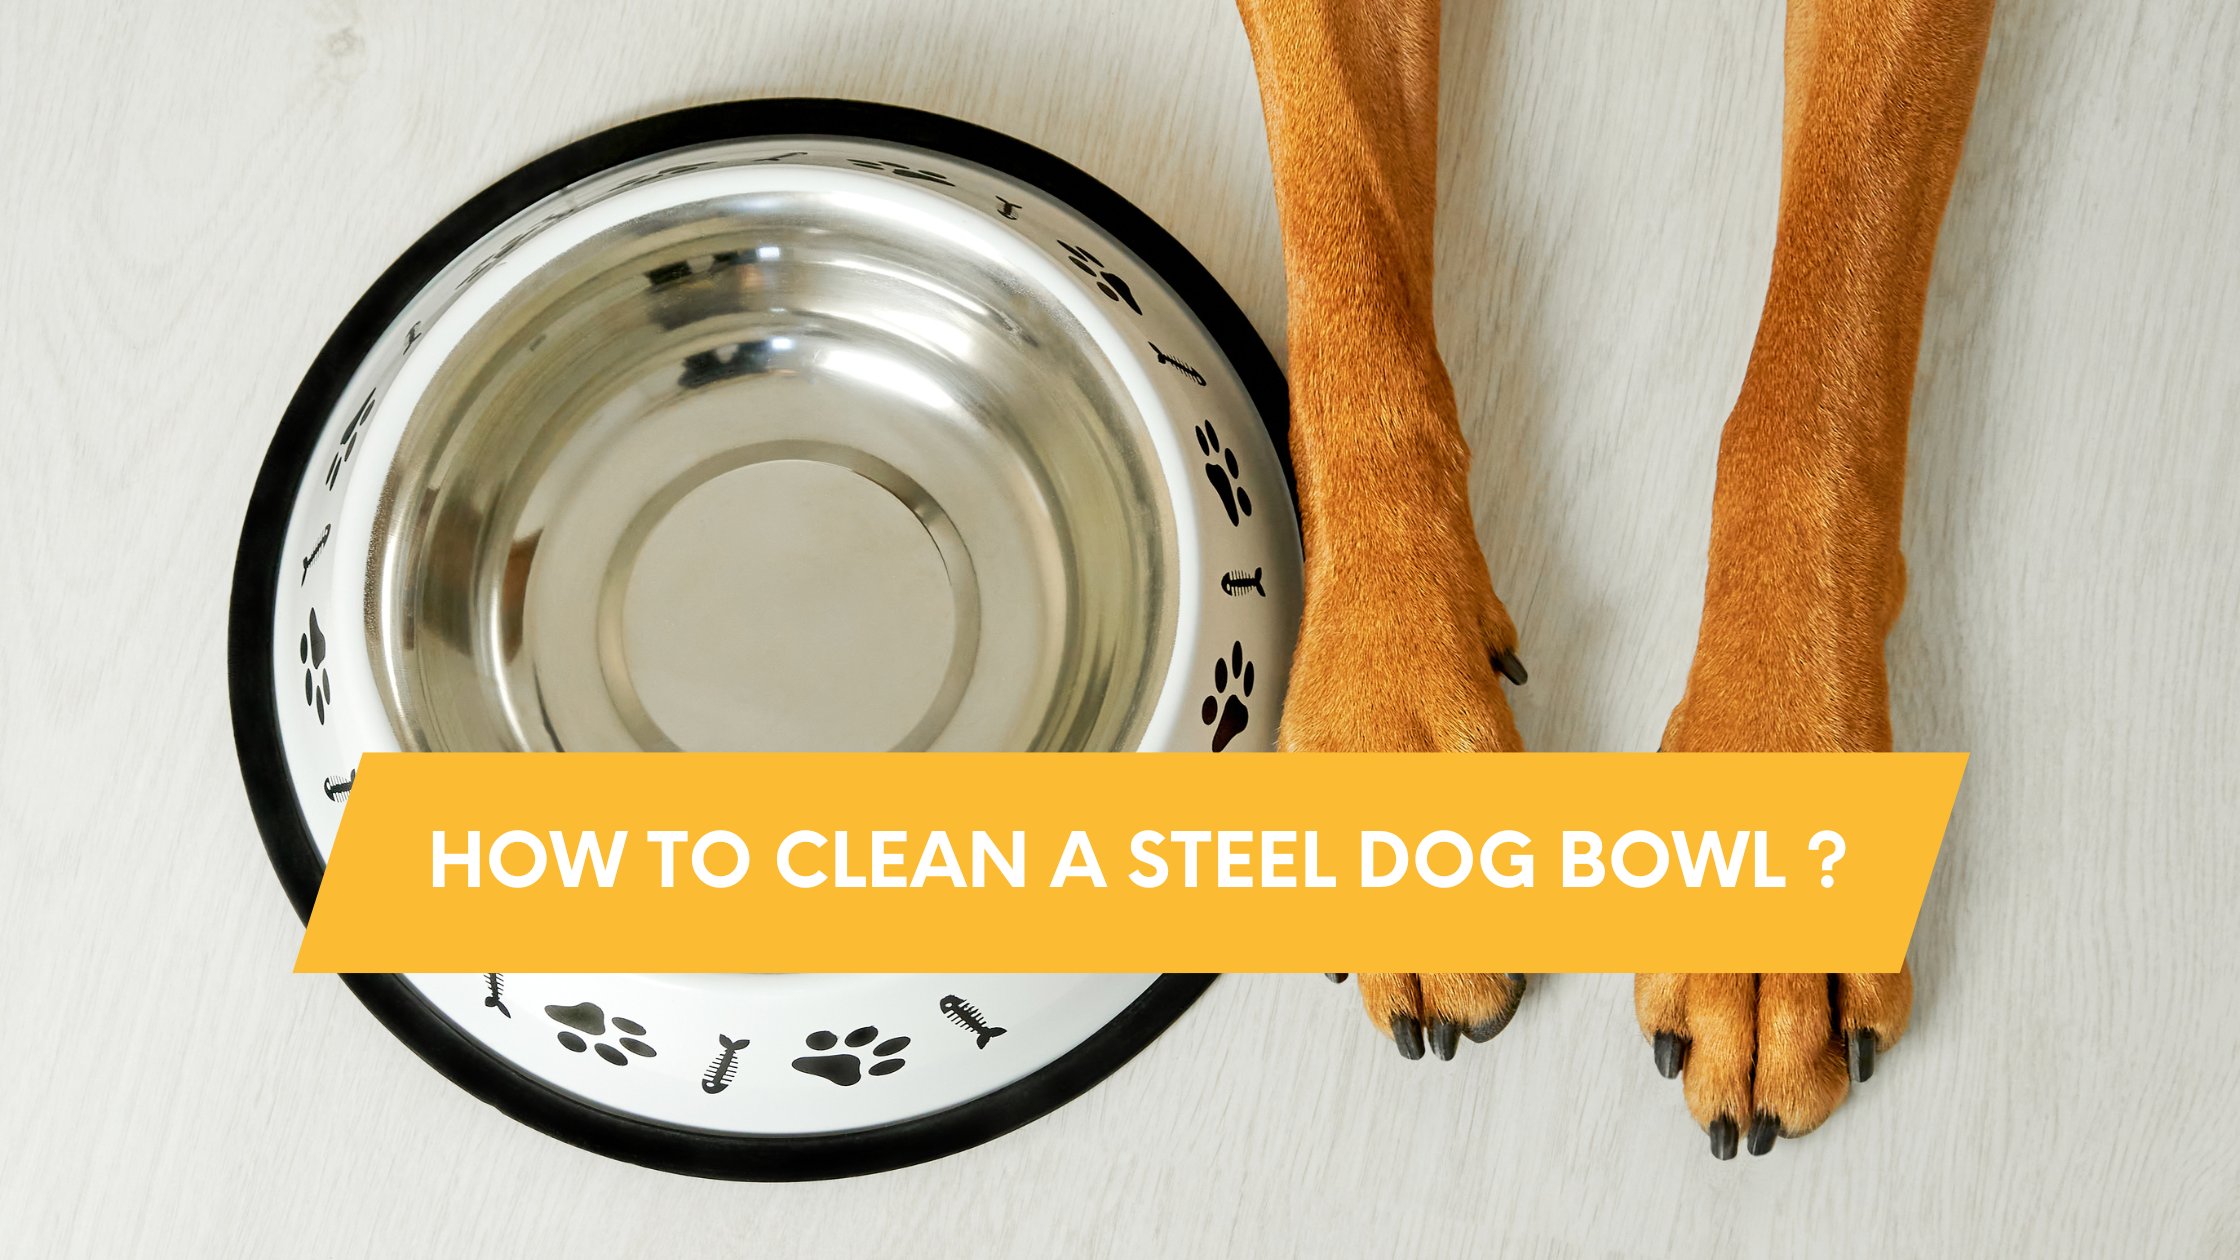 How to clean a steel dog bowl